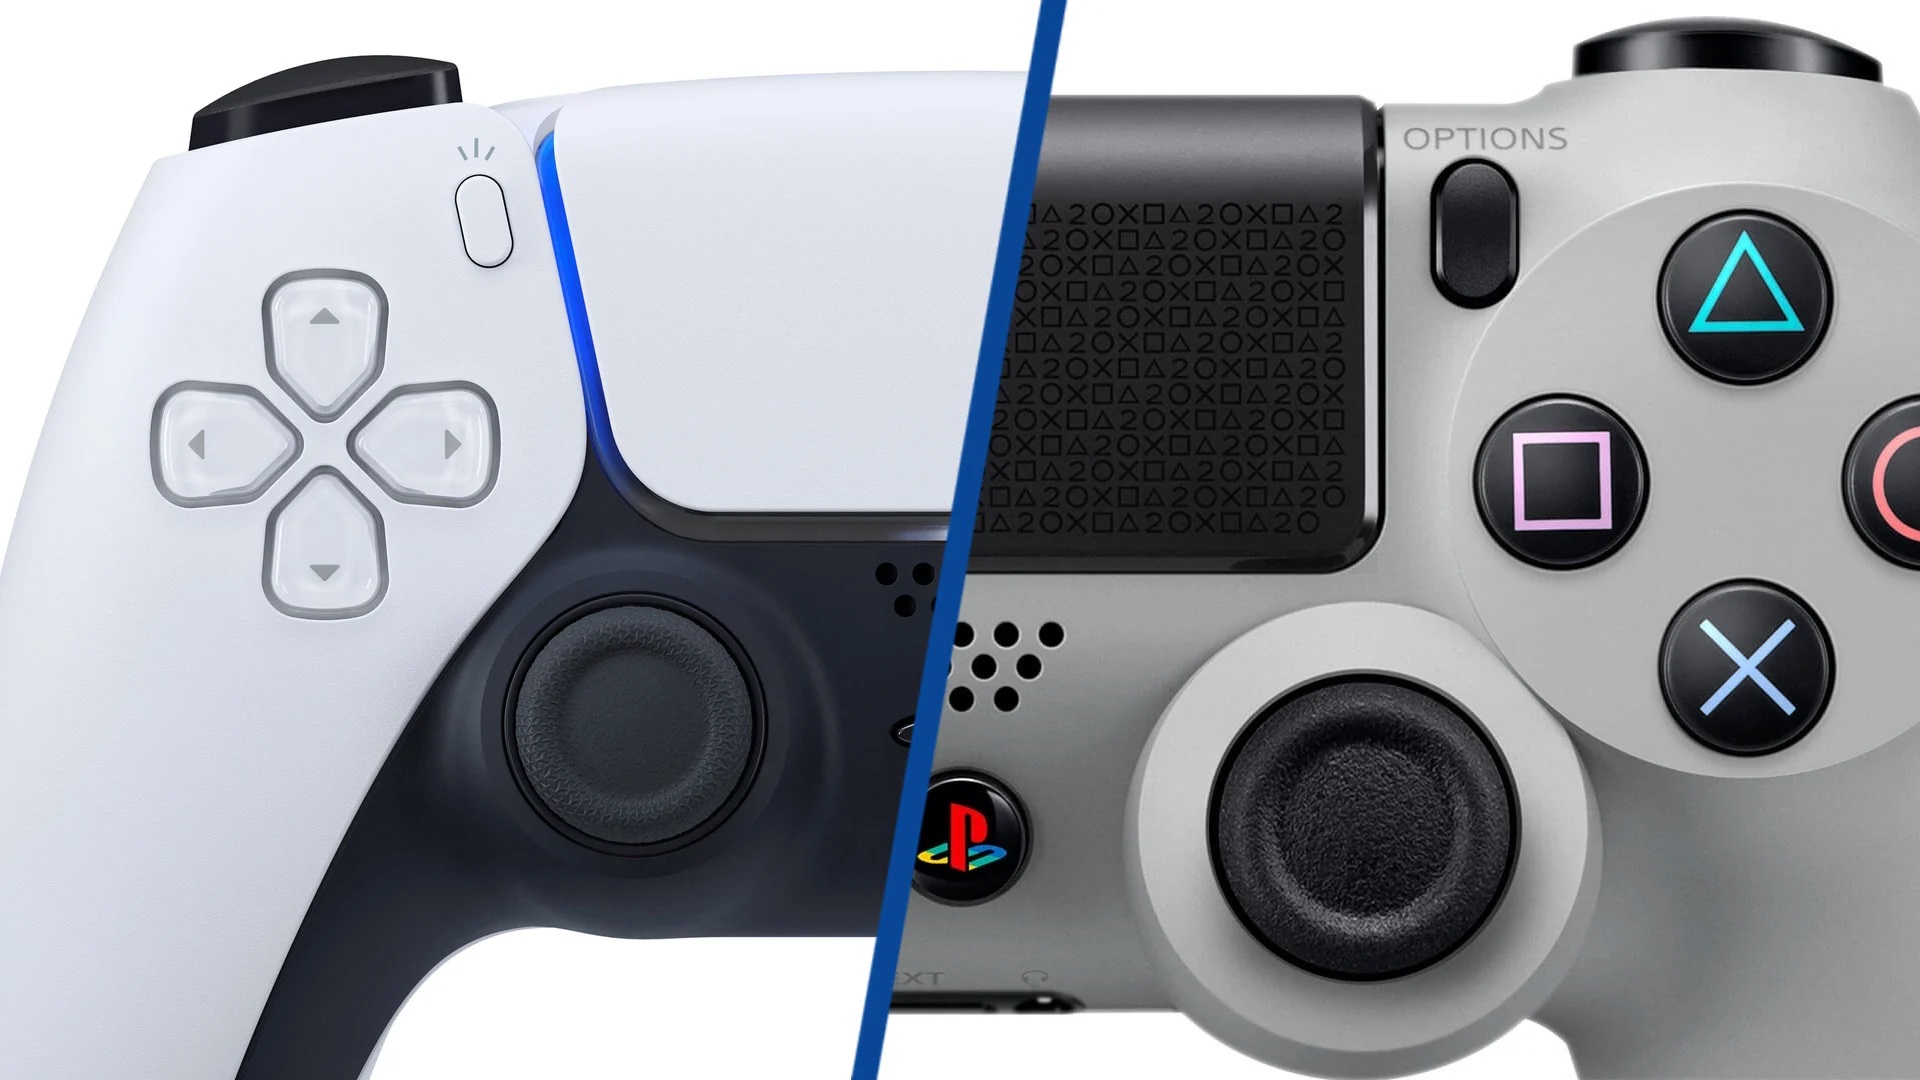 Ps4 playstation 5. Dualshock 4 20th Anniversary. Дуалшок 5. Ps5 Dualshock 5. PLAYSTATION 5.